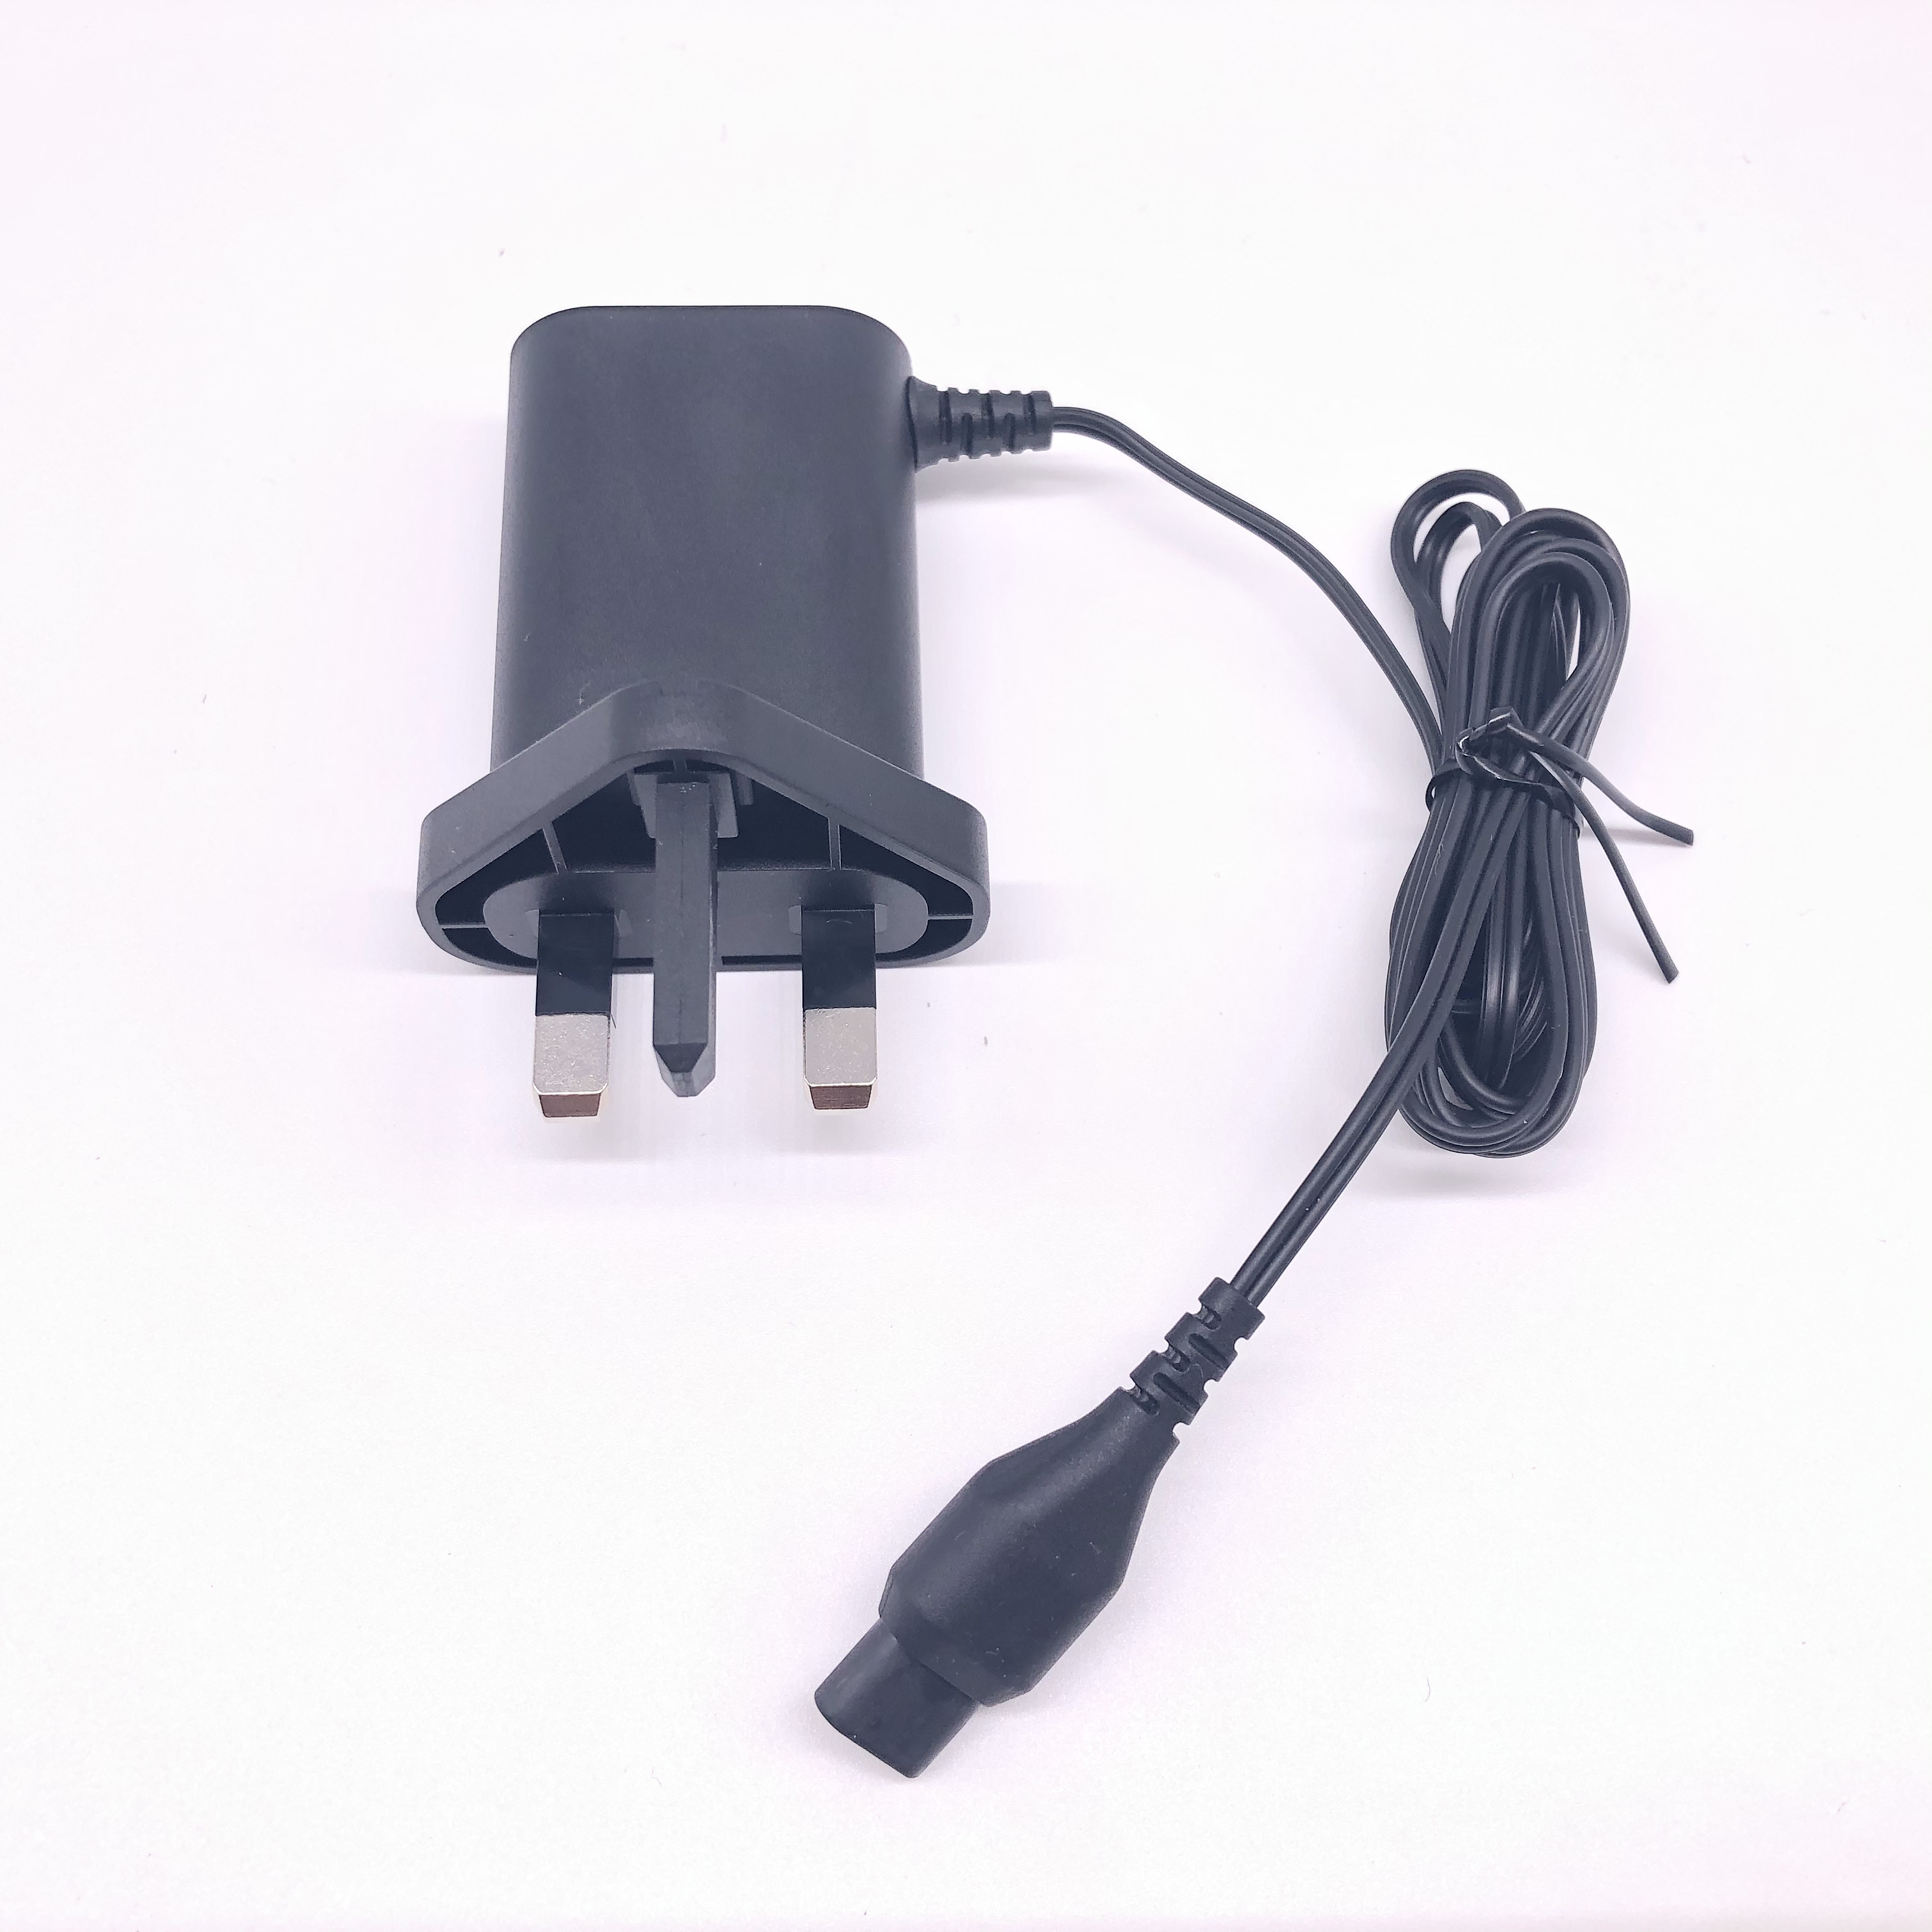 5.5v 600ma karcher adaptor uk plug charger with CE GS for WV2 WV50 window cleaner